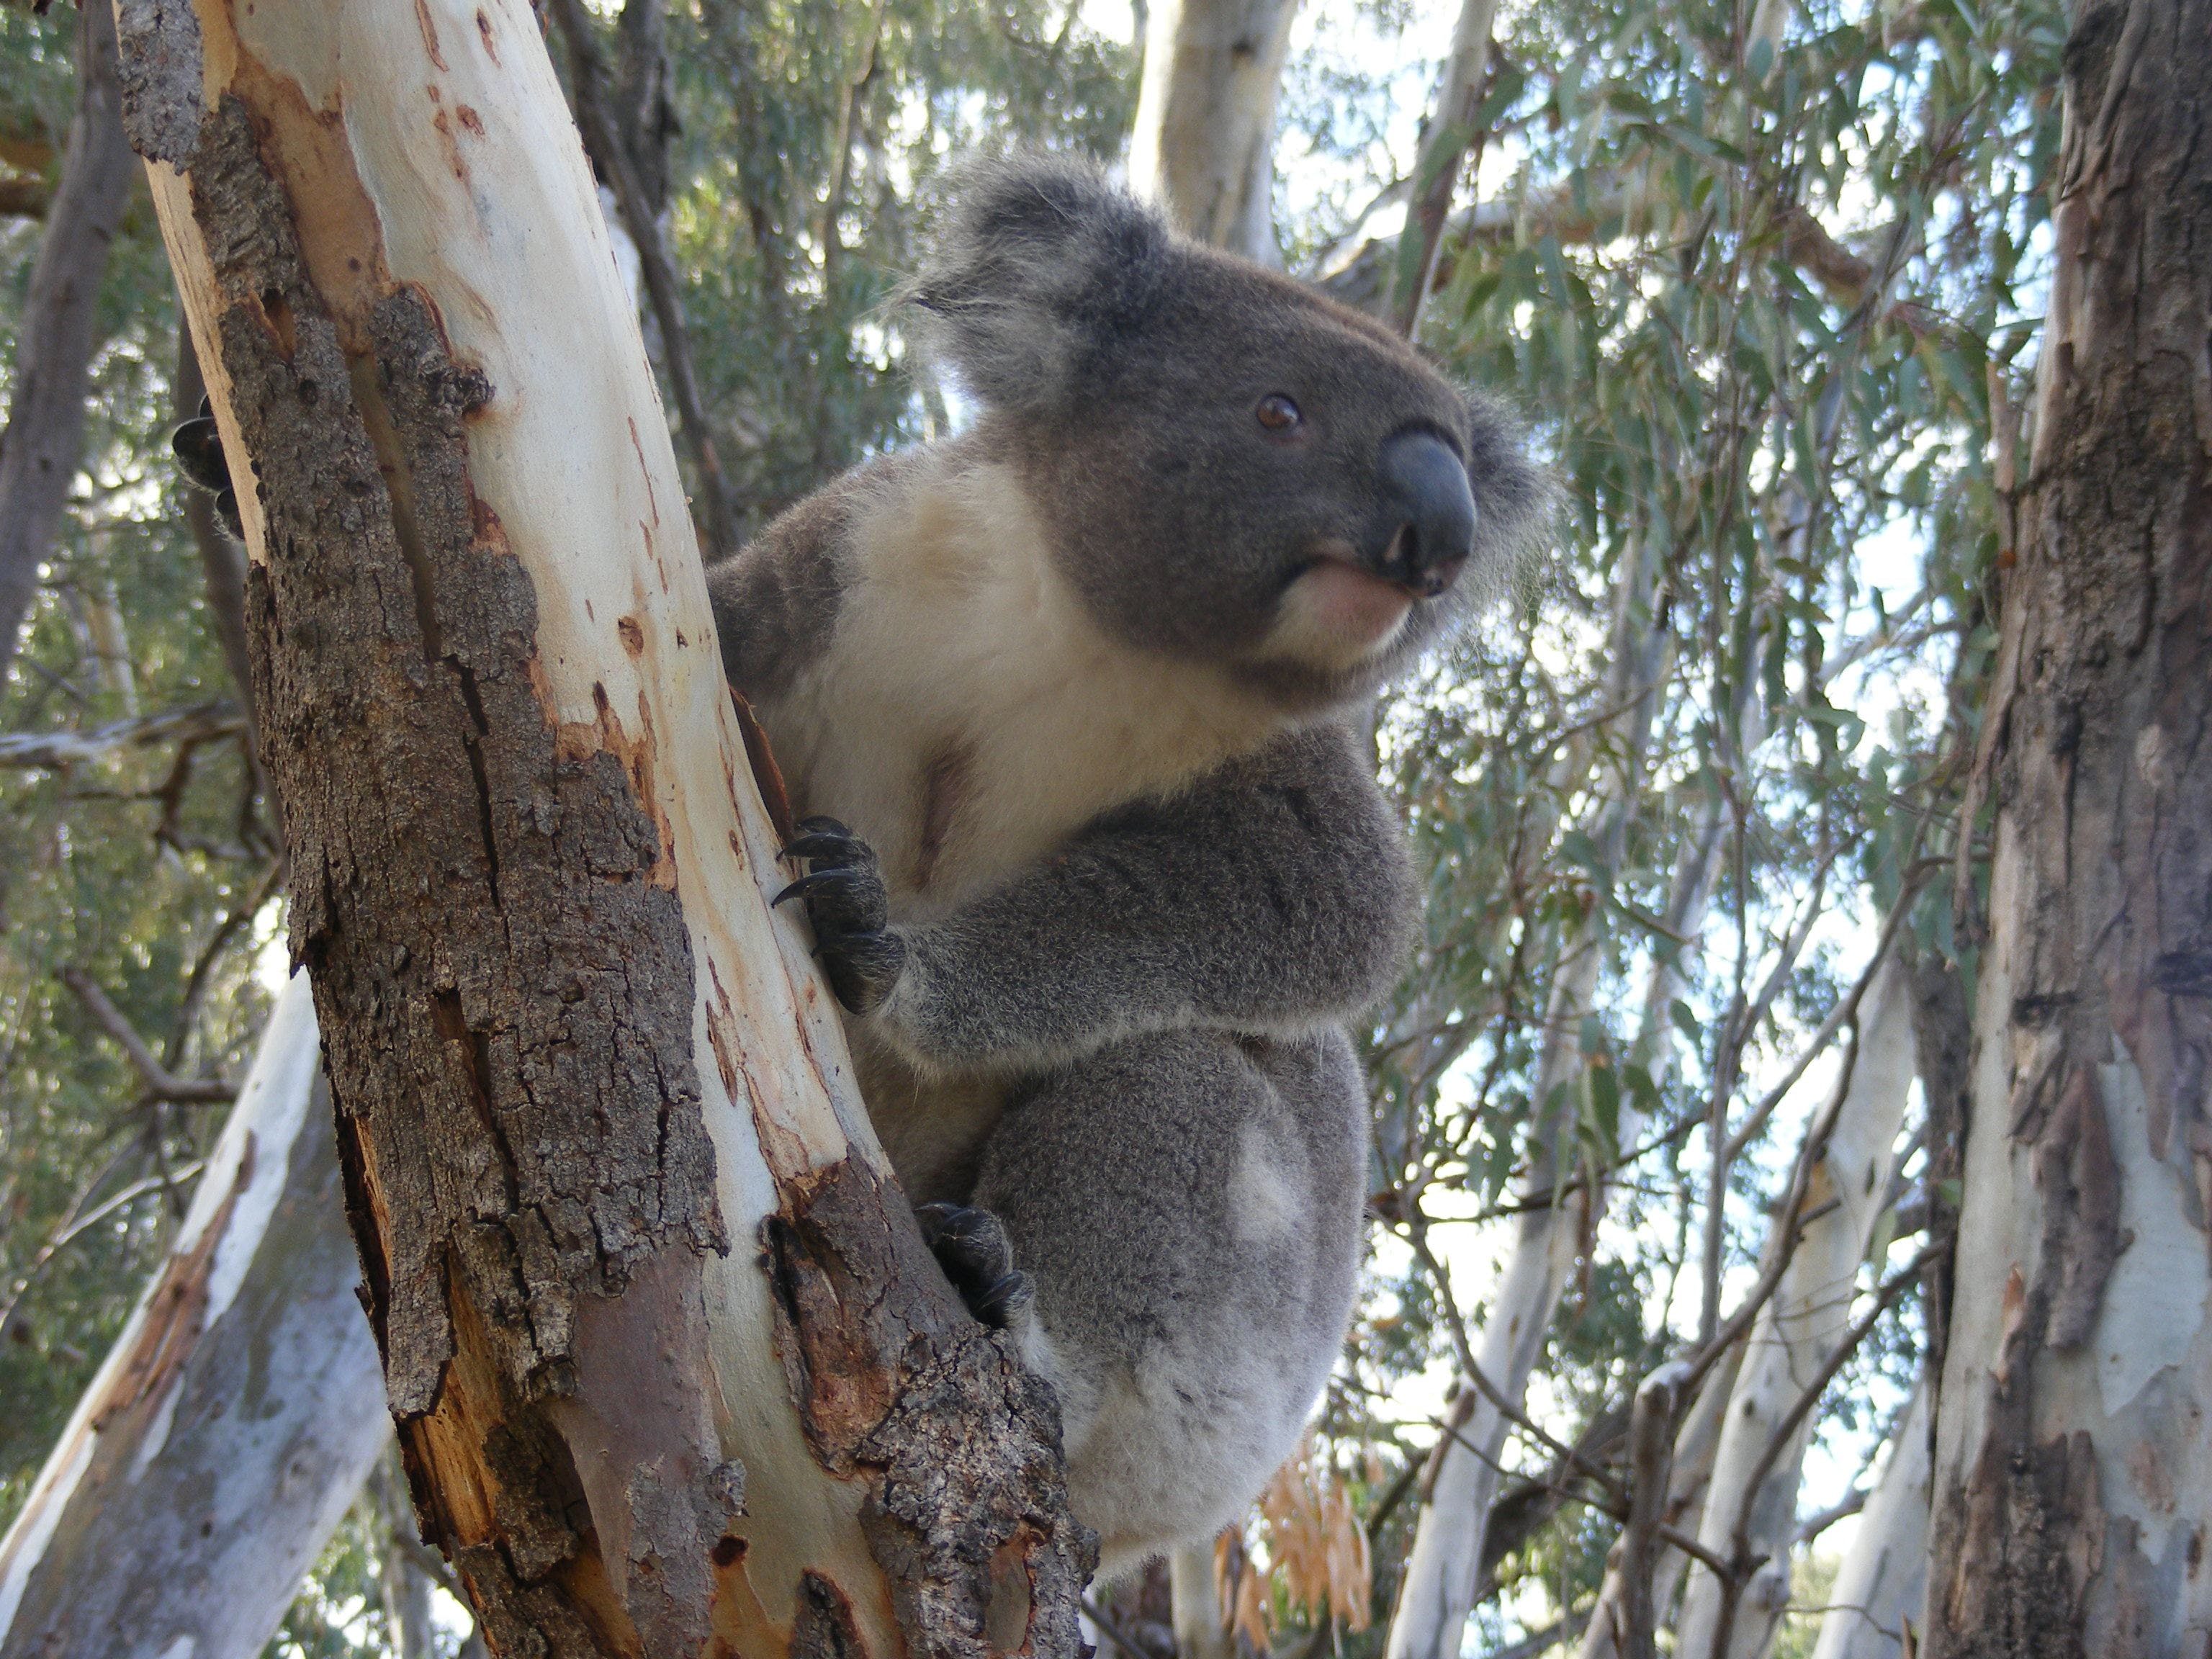 Annual Koala Count - Accommodation Bookings